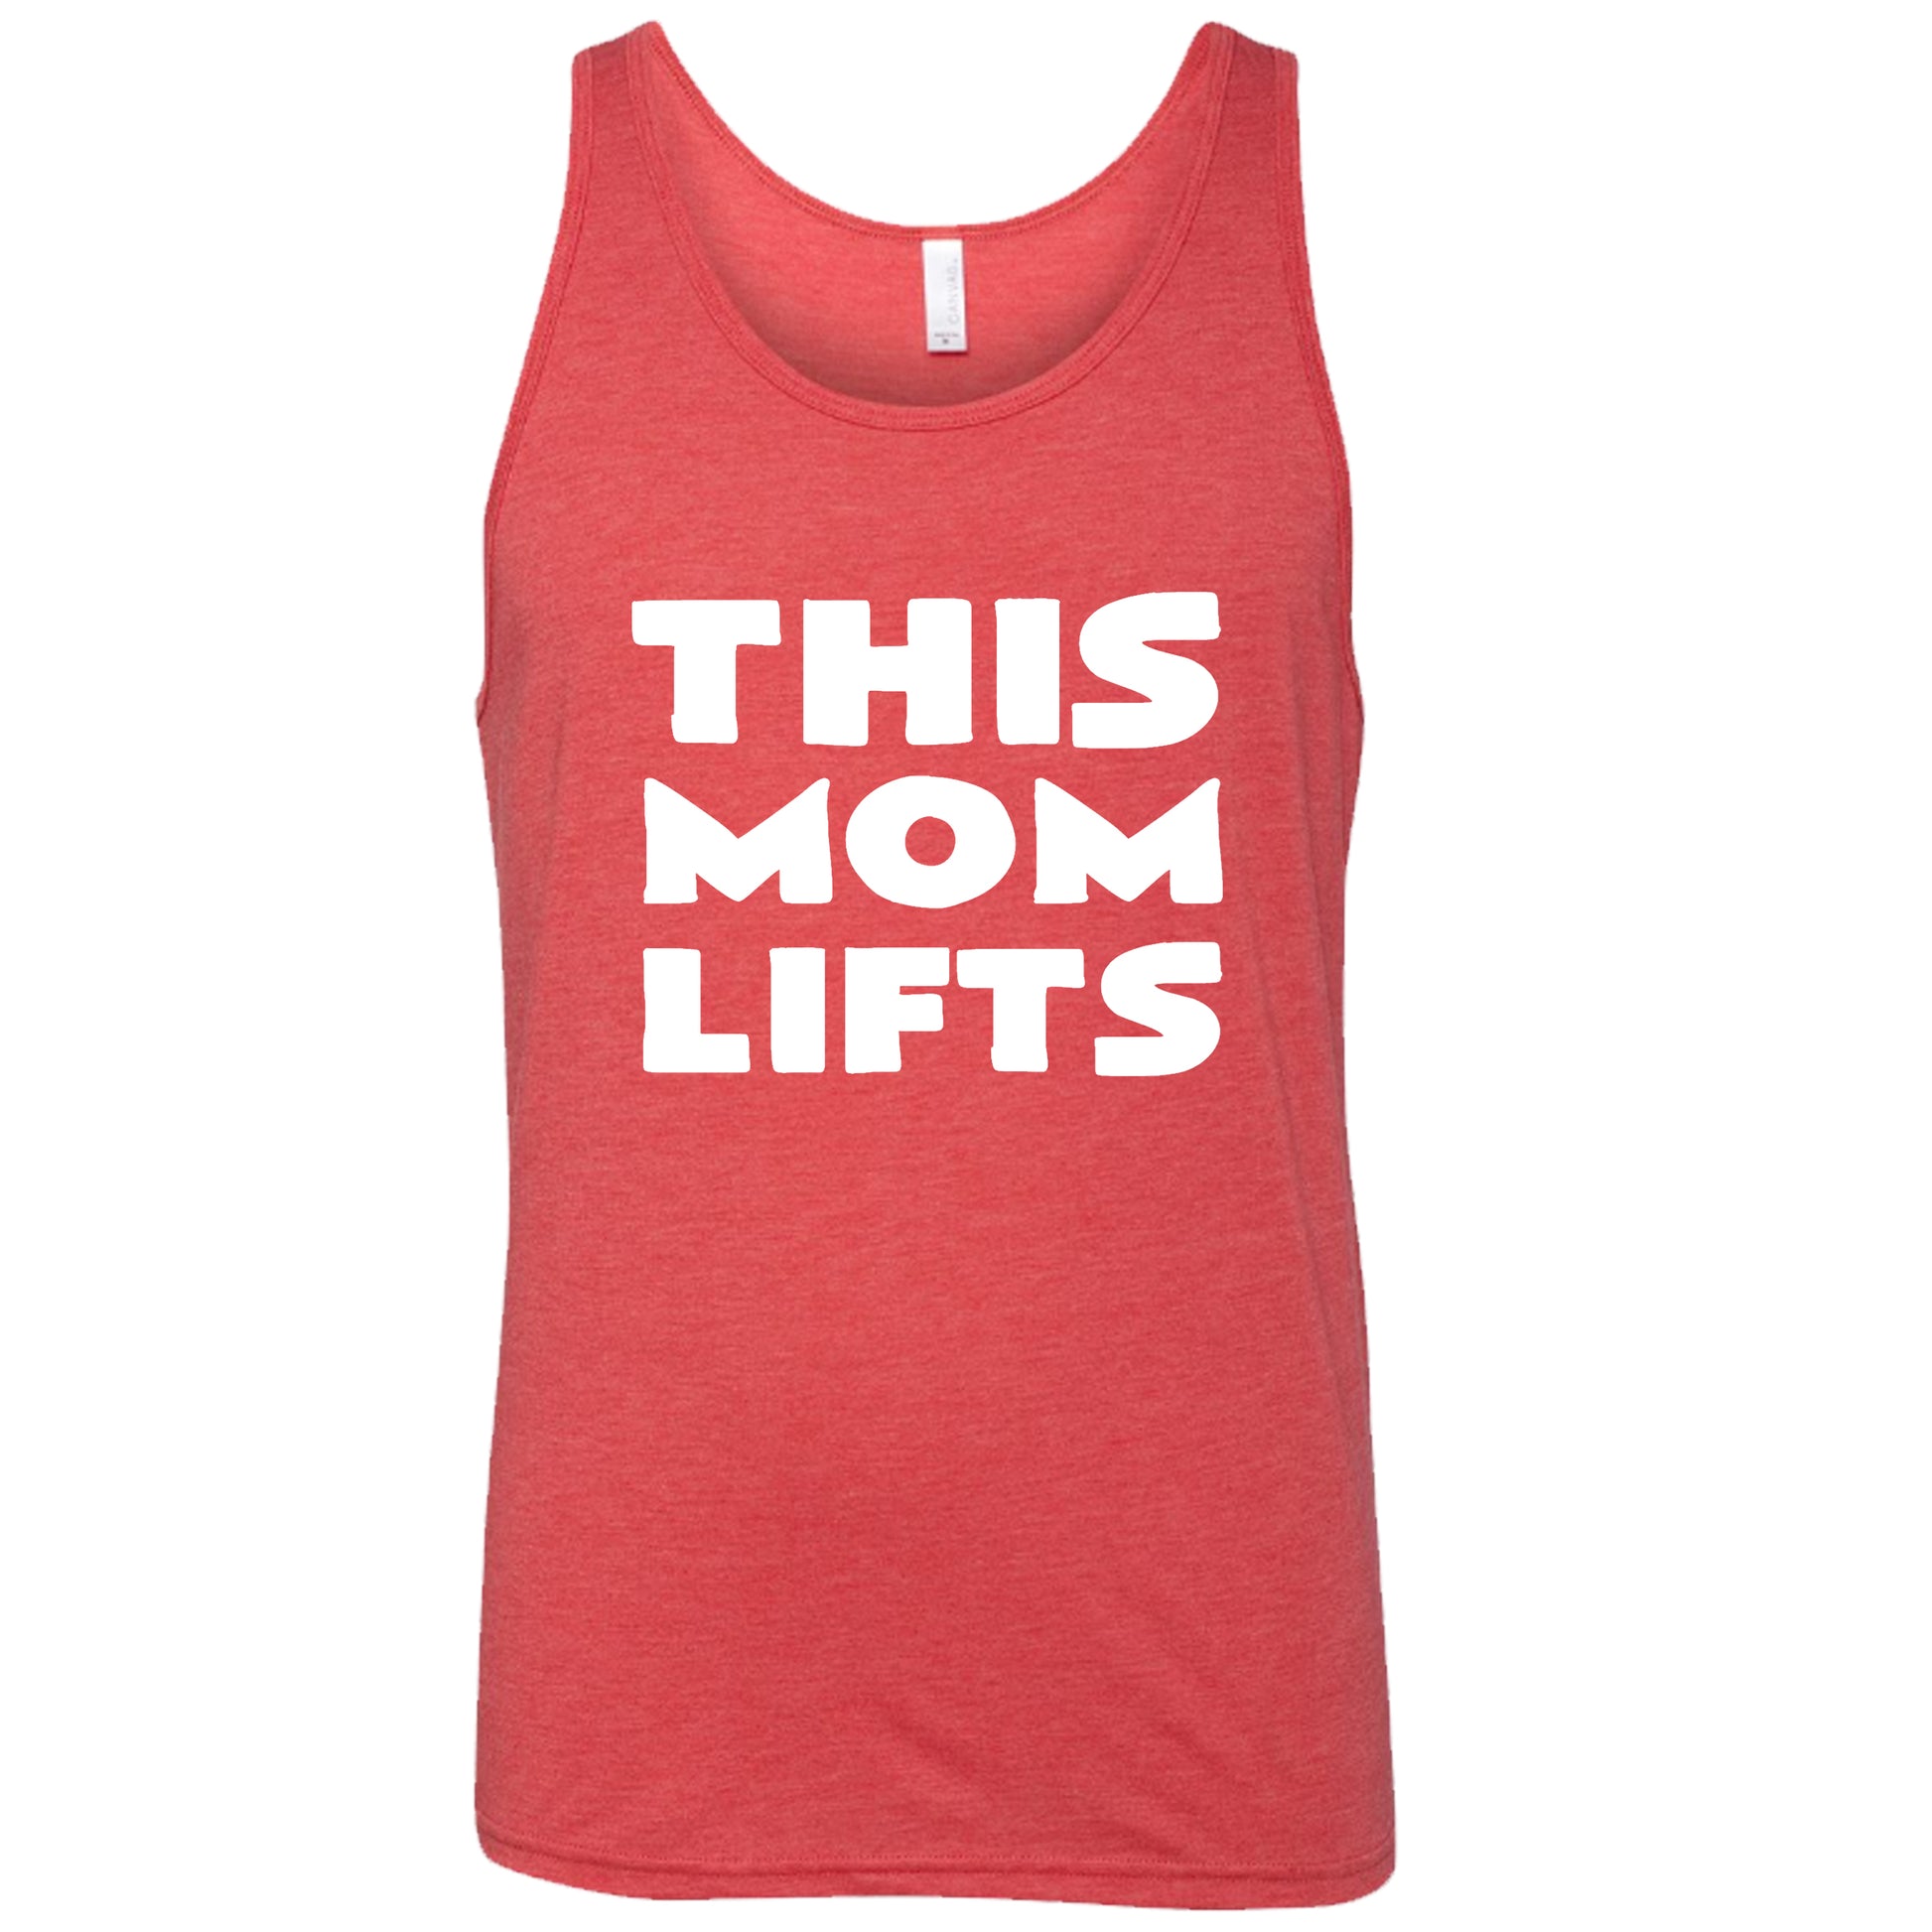 red unisex tank with the saying "this mom lifts" in the center in white lettering